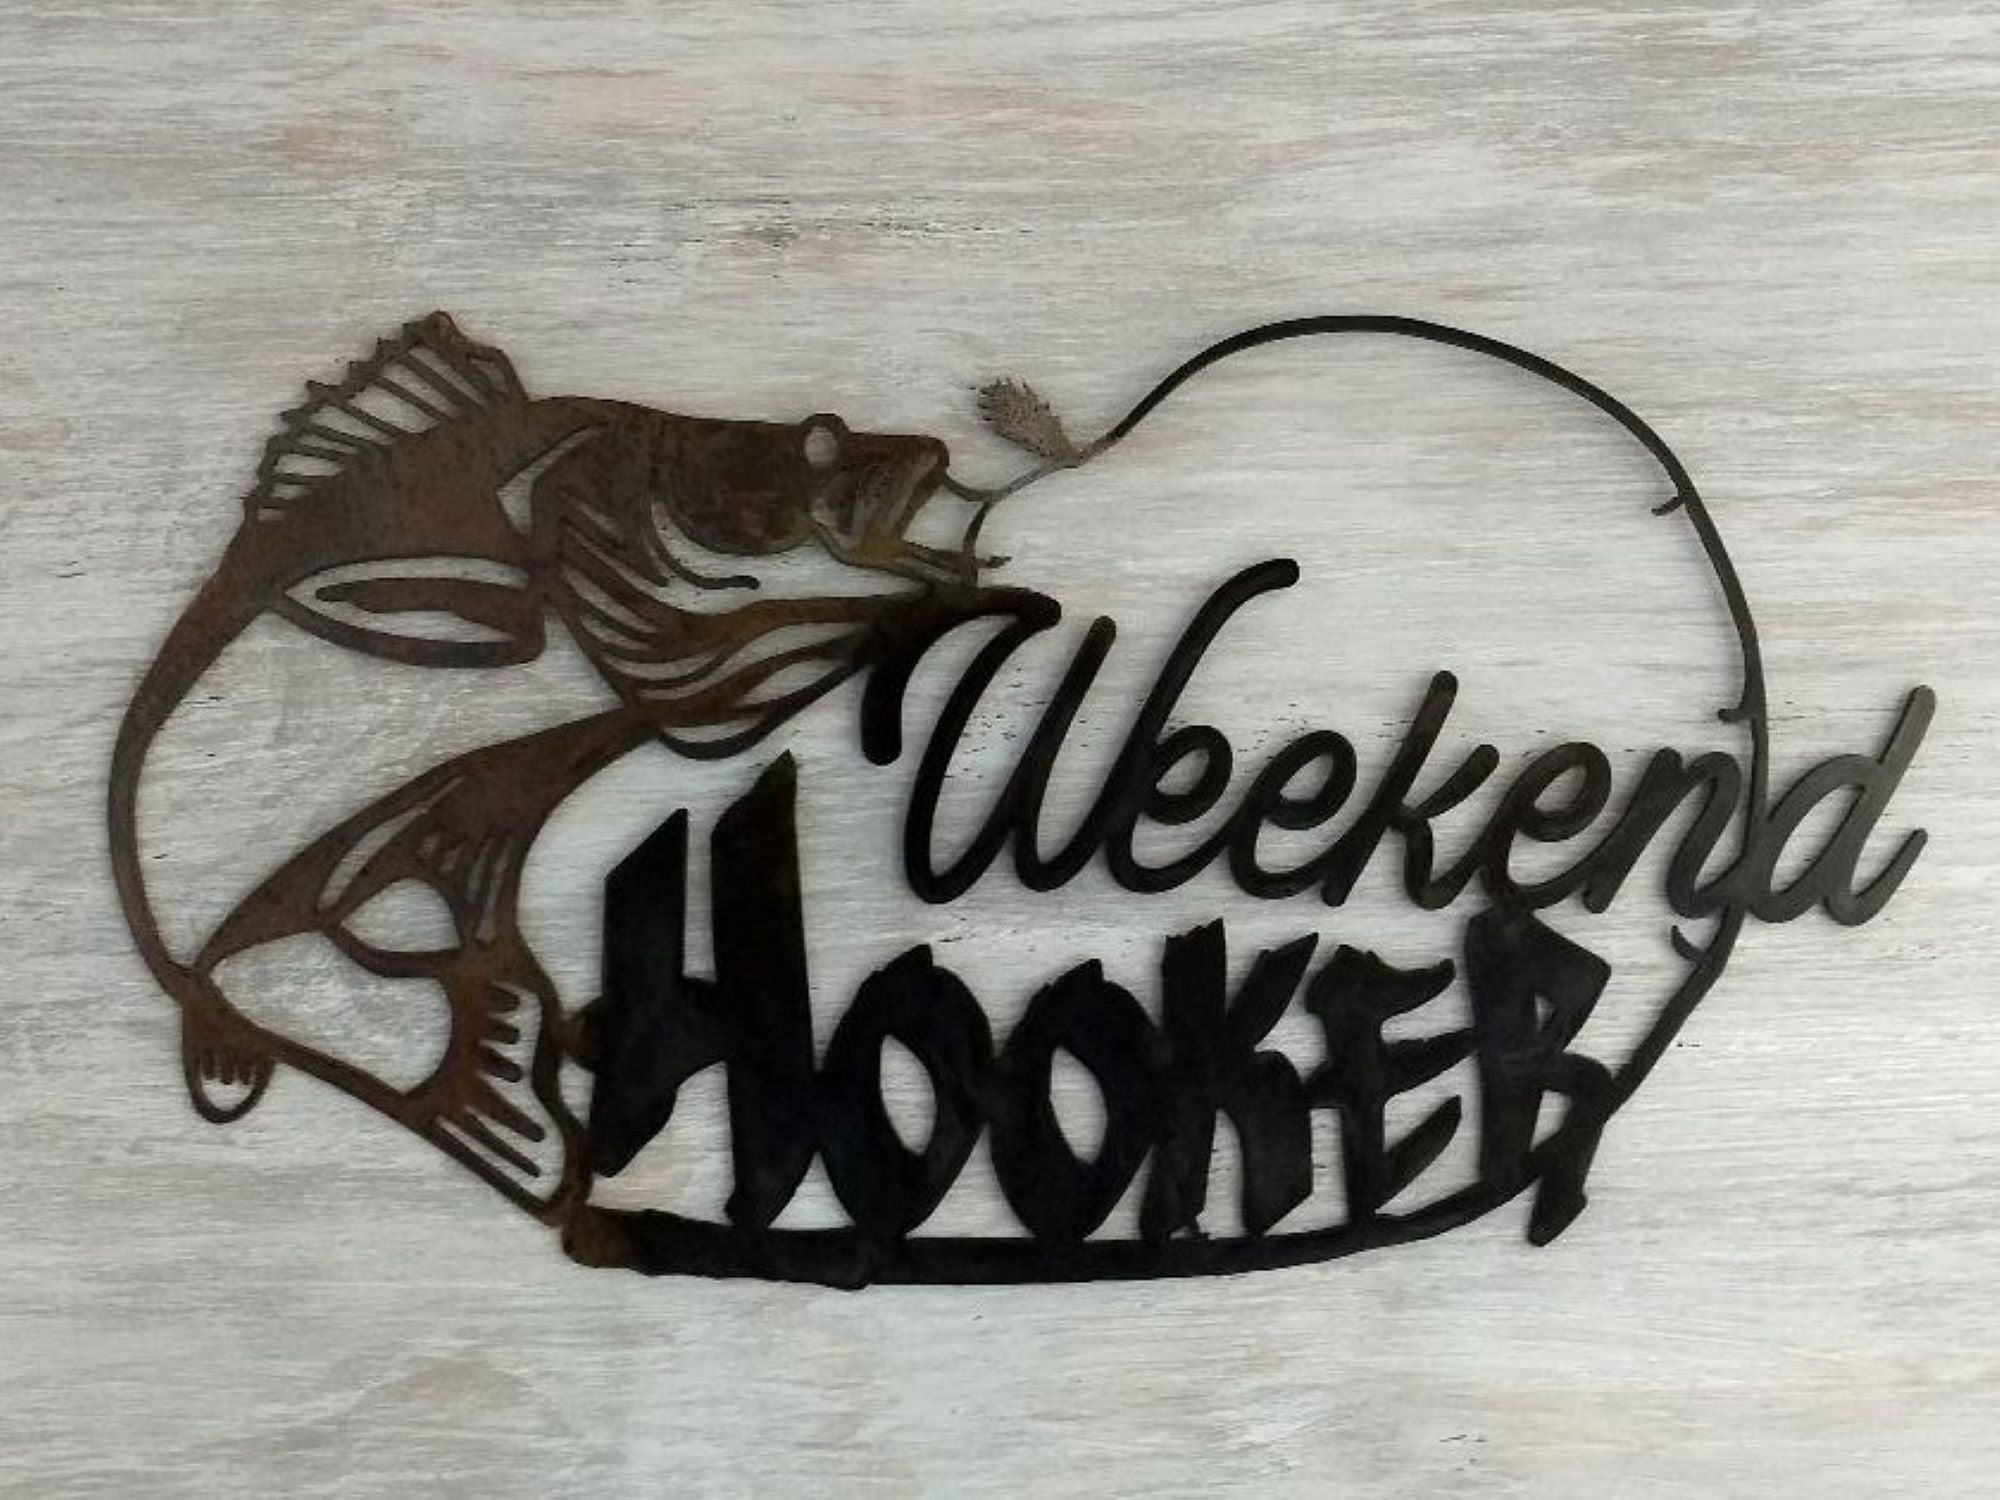 Humorous Metal Fishing Sign, Weekend Hooker Sign, Gift for